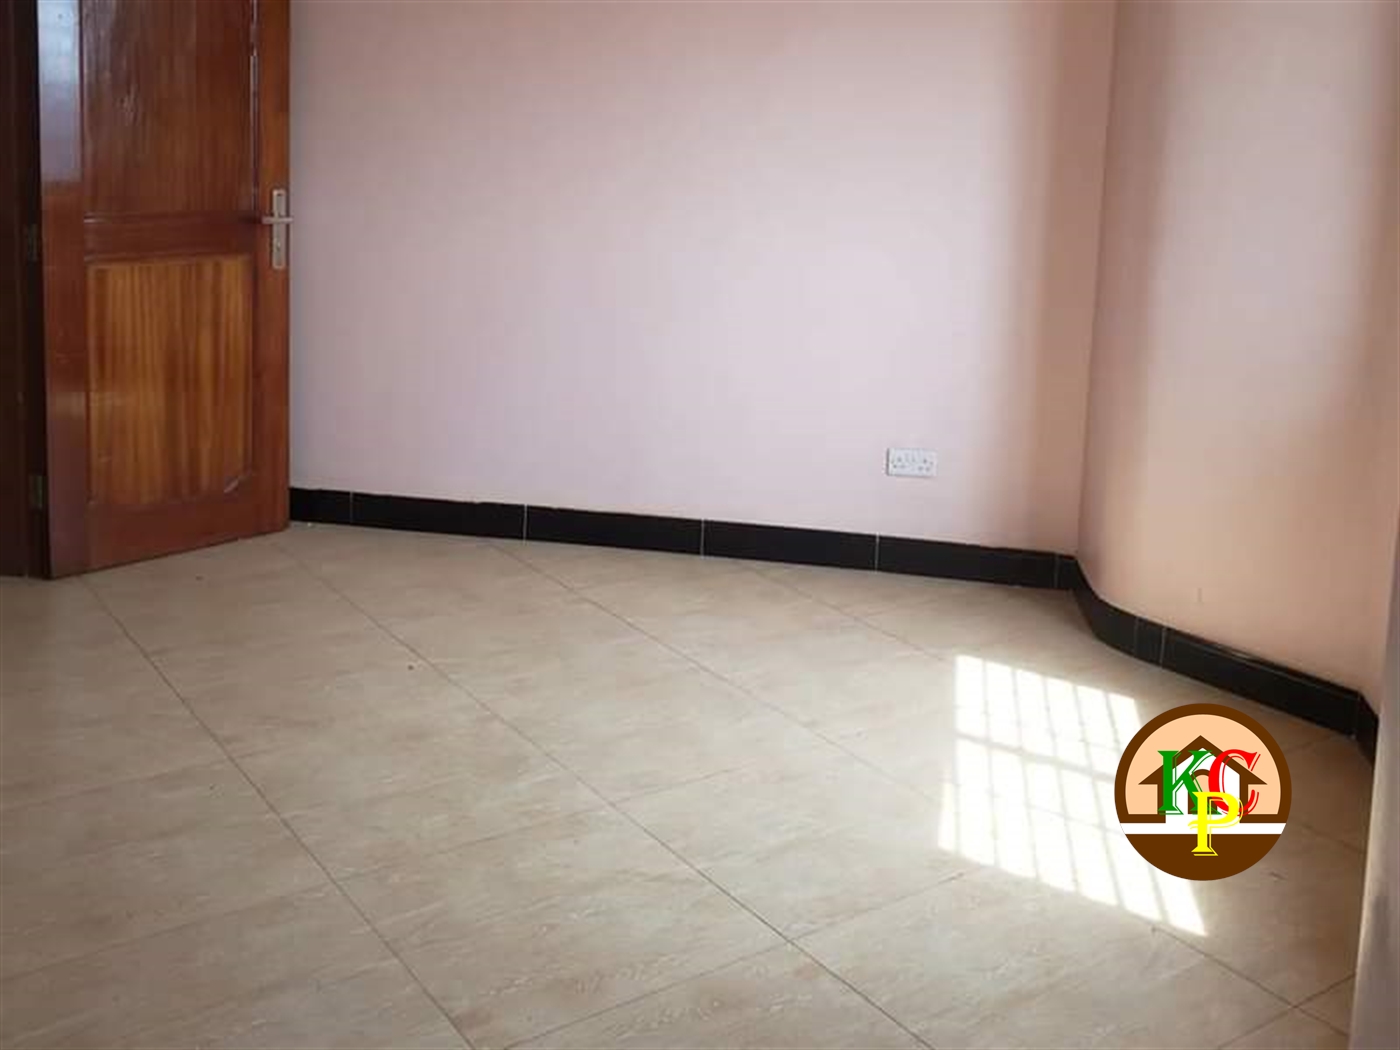 Apartment for rent in Mpereerwe Kampala